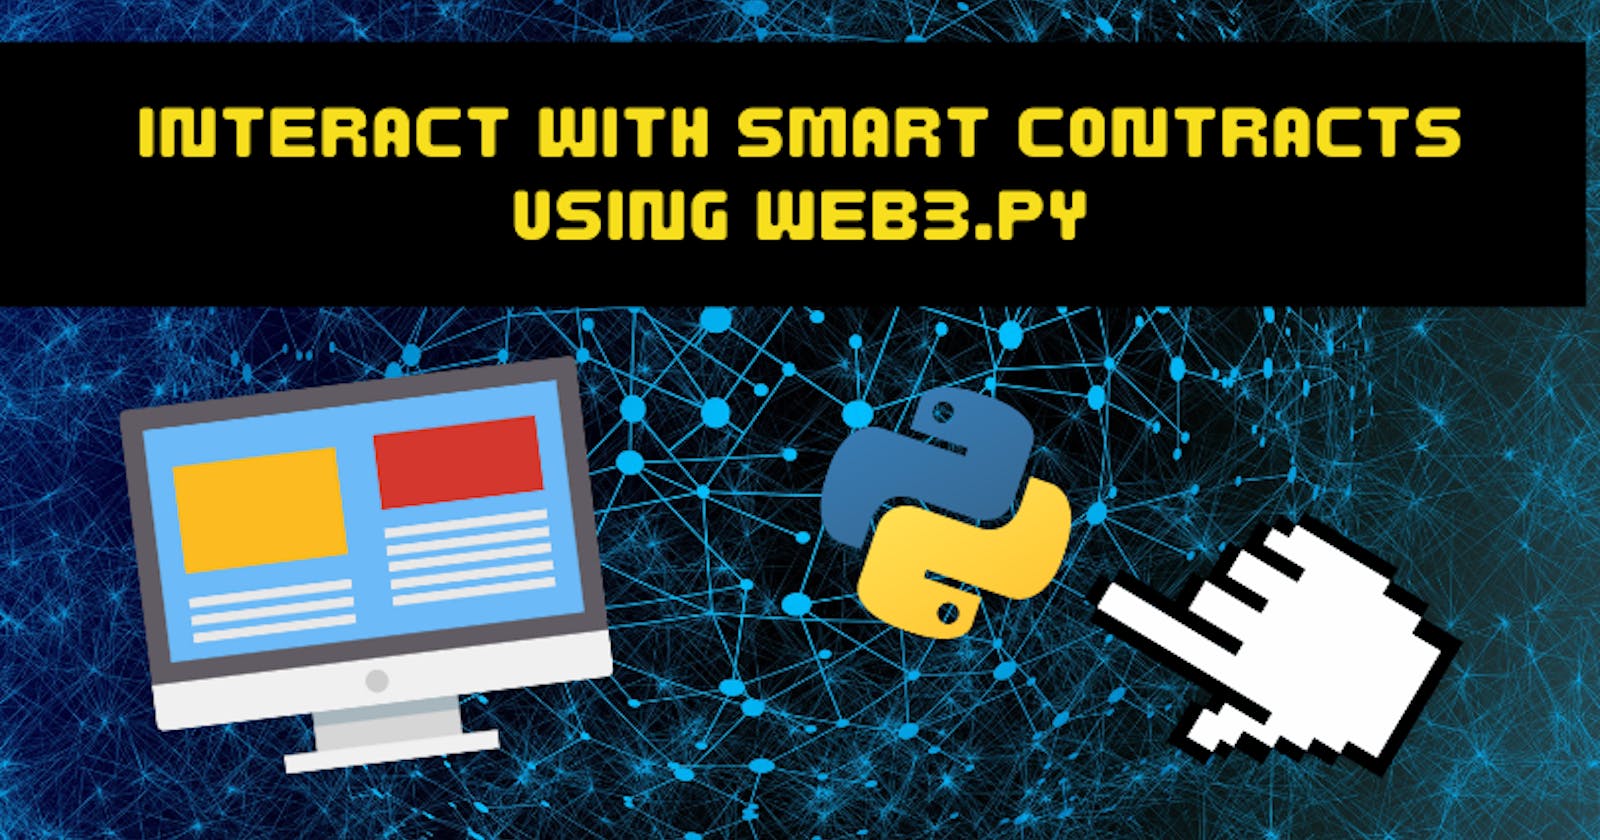 Call smart contract functions using web3.py